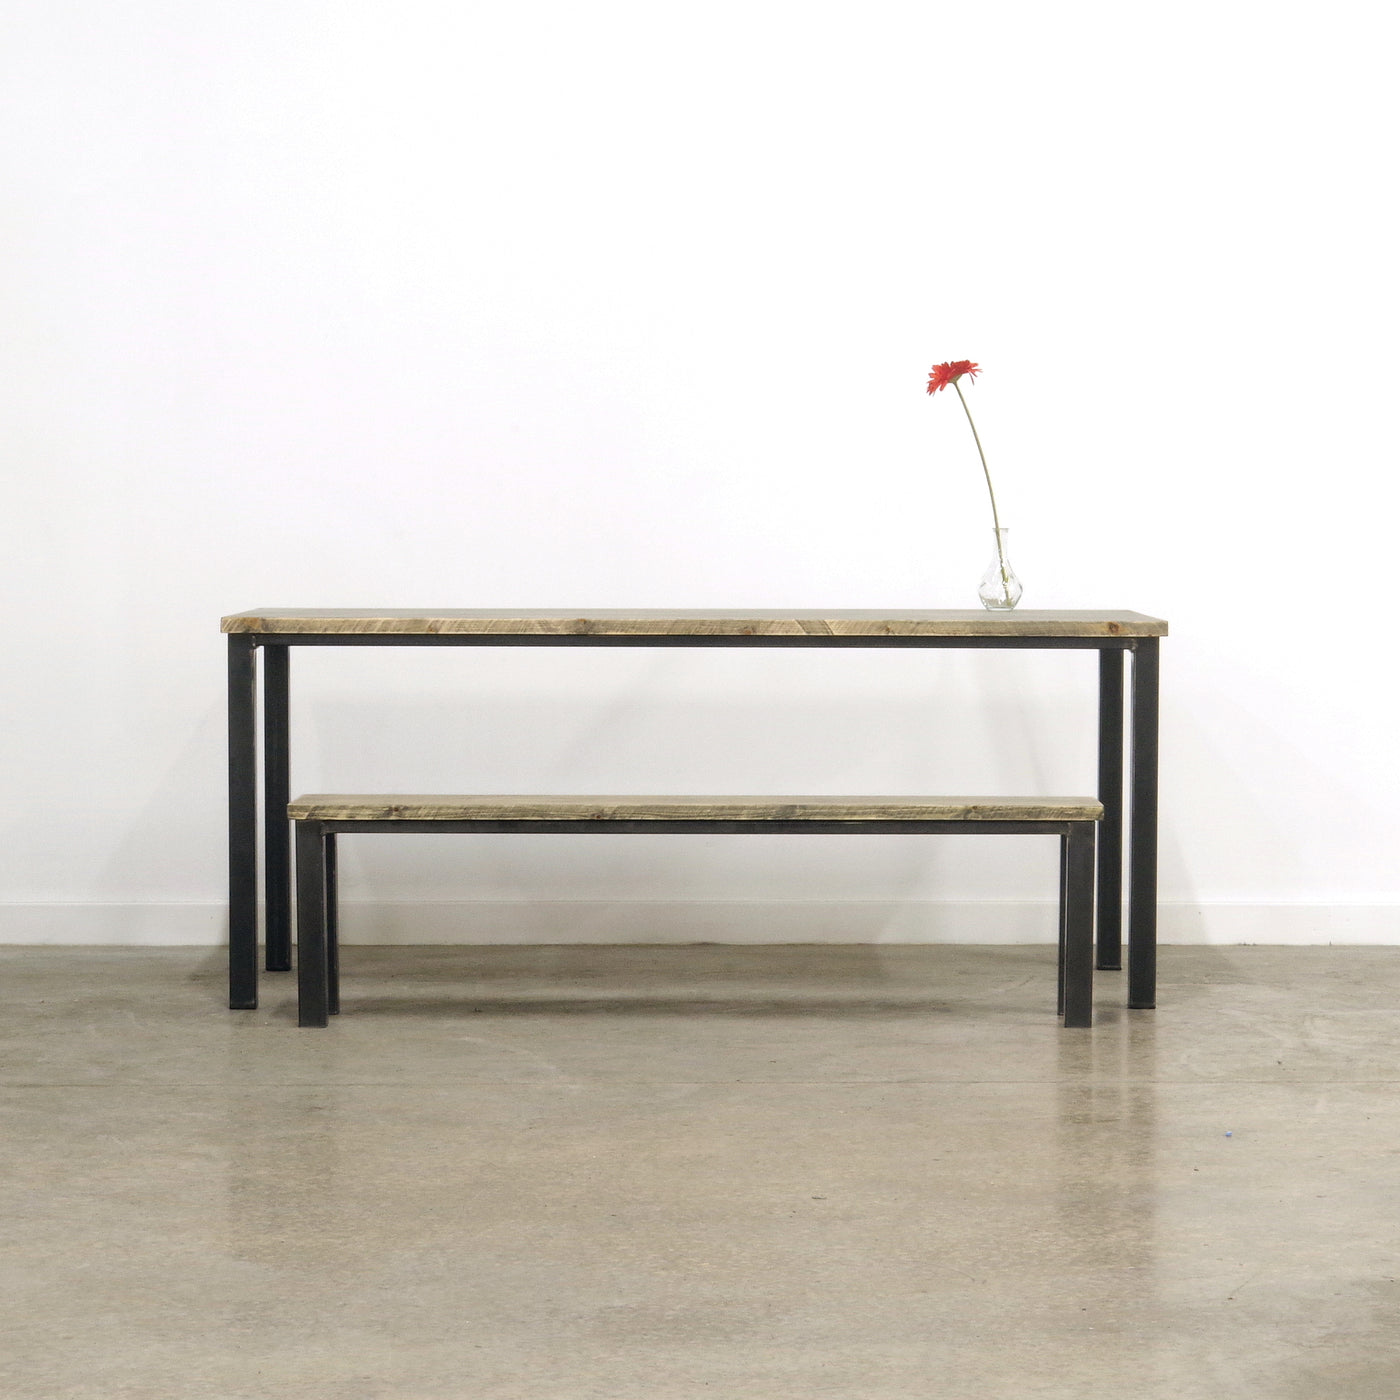 wood and metal table and bench absalom classics